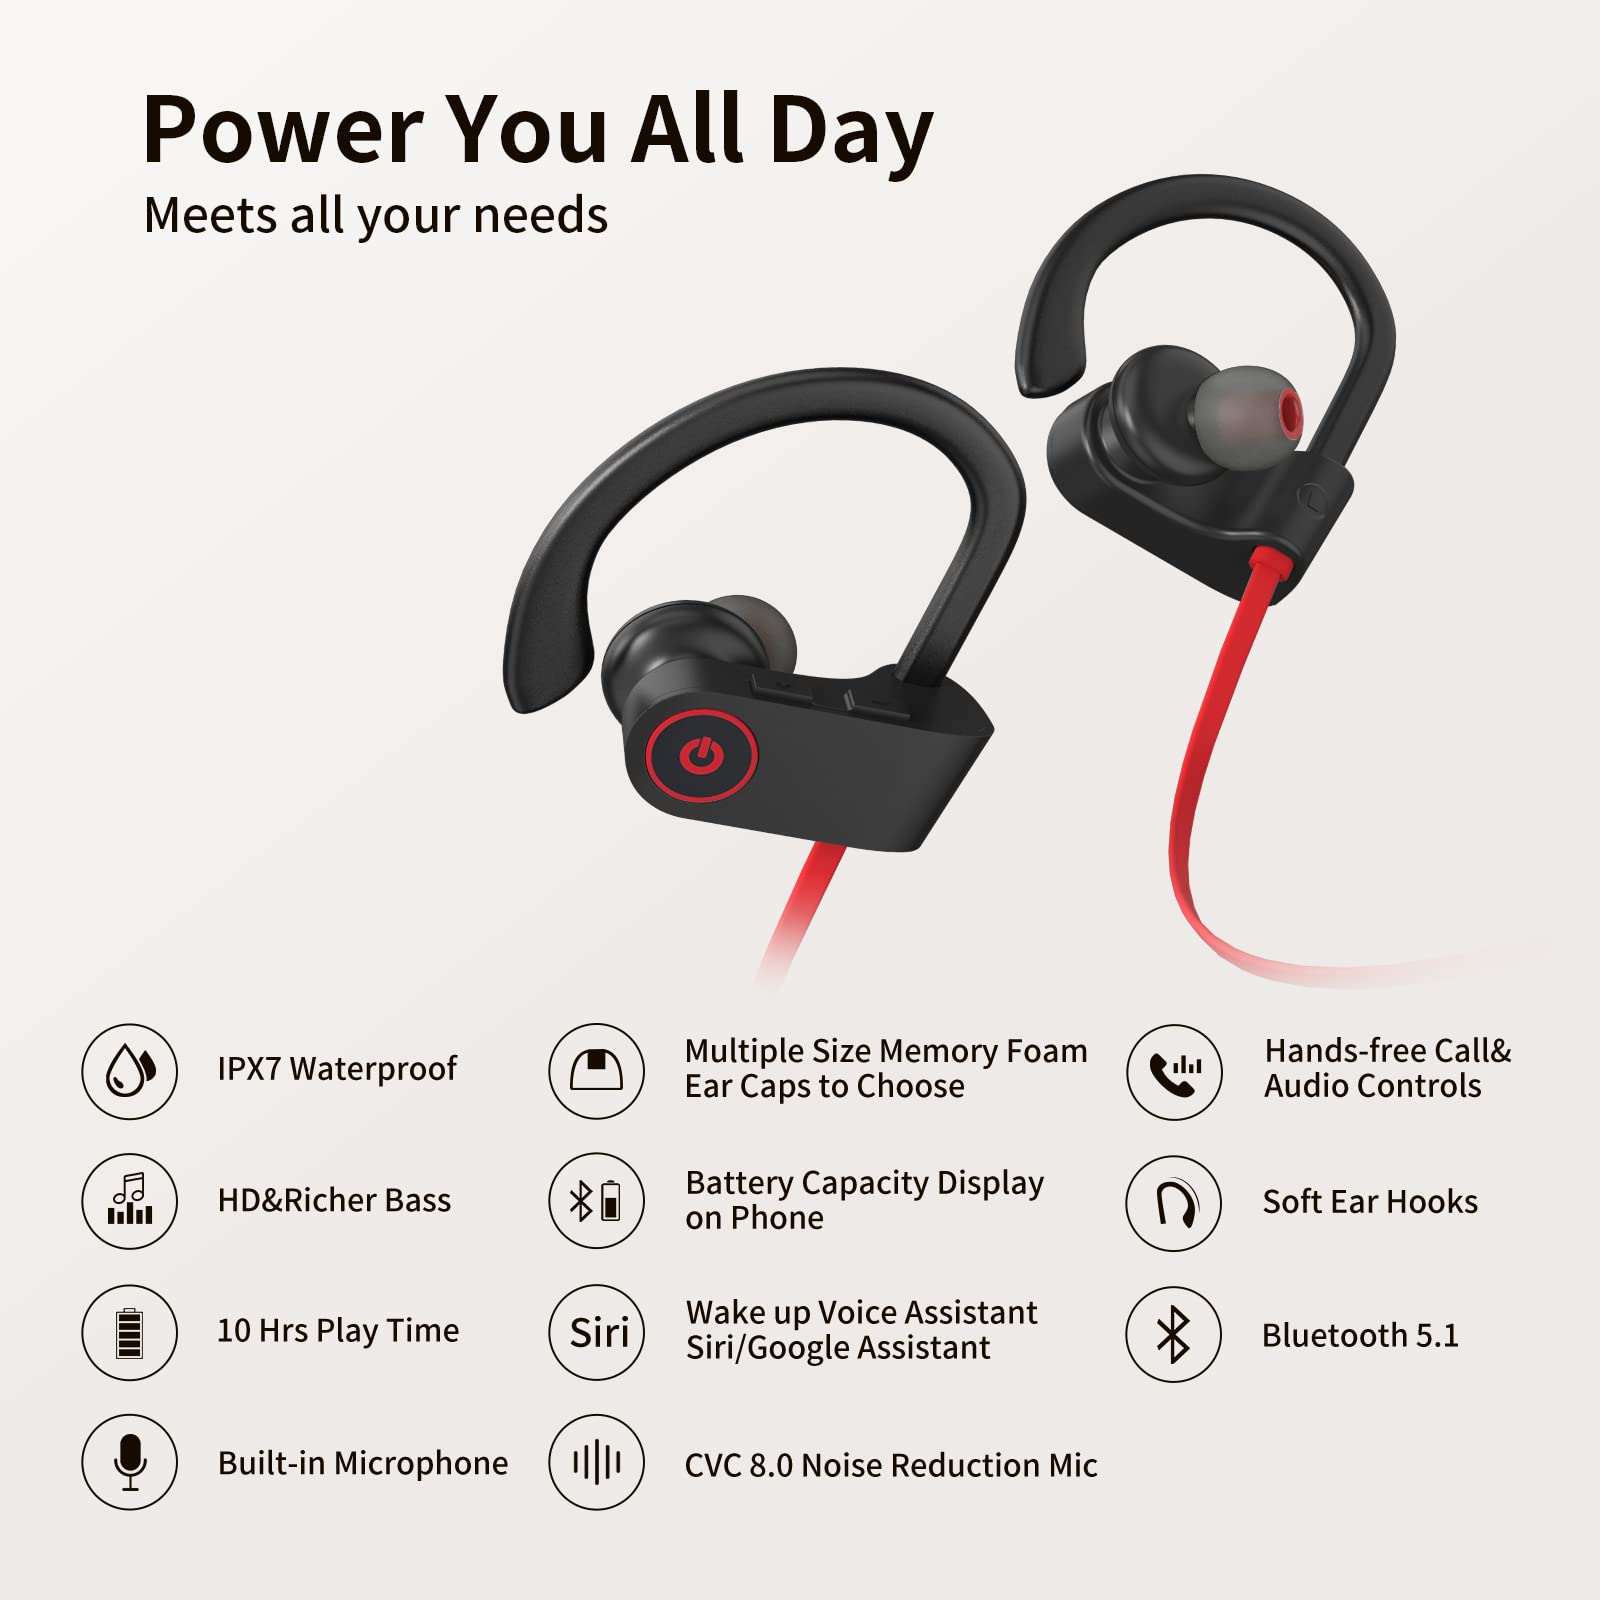 CXK Bluetooth Headphones Wireless Earbuds Bluetooth 5.3 Running Headphones with 15 Hours Playtime IPX7 Waterproof Earphones for Sports and Workout